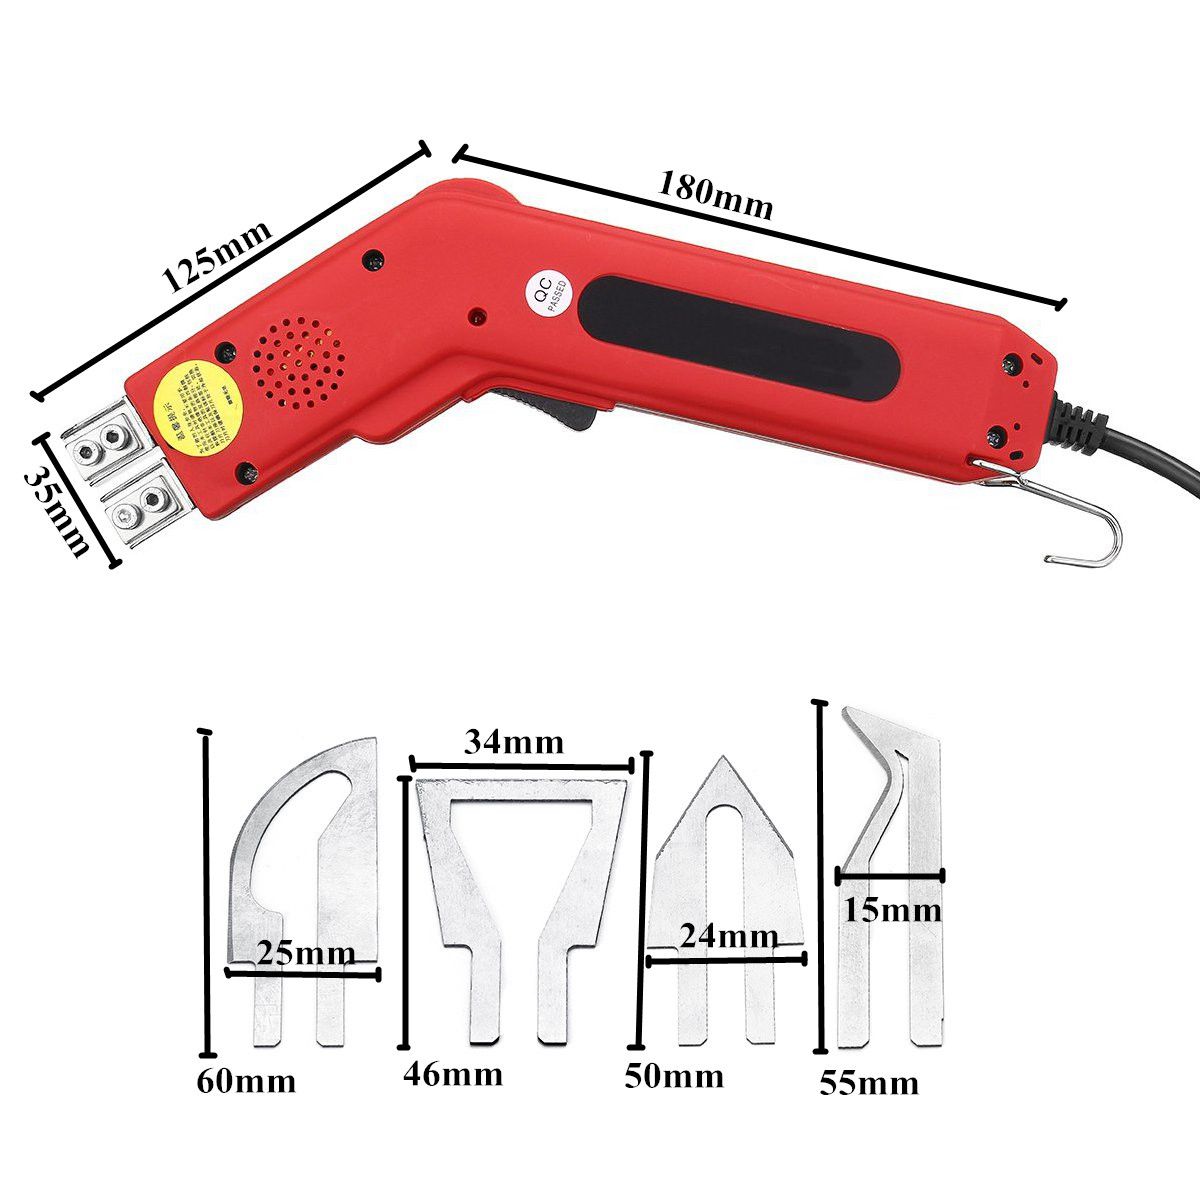 100W-Handheld-Hot-Heating-Cutter-Electric-Hot-Cutter-Foam-Cutter-Heat-Sealer-For-Cloth-Cable-Wire-Ro-1453046